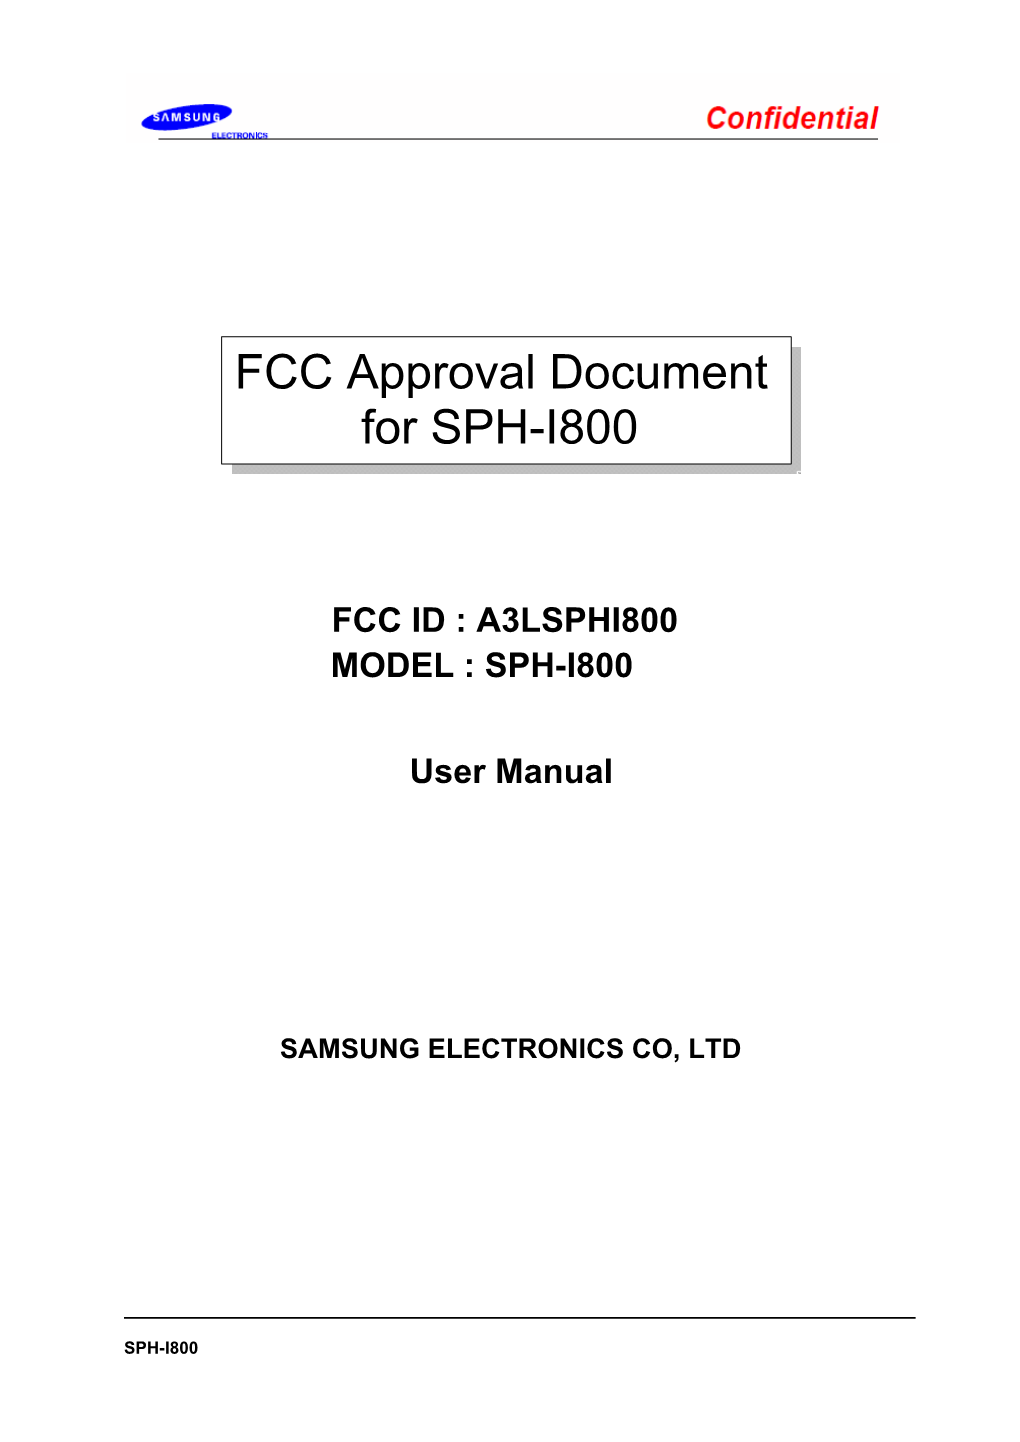 FCC Approval Document for SPH-I800